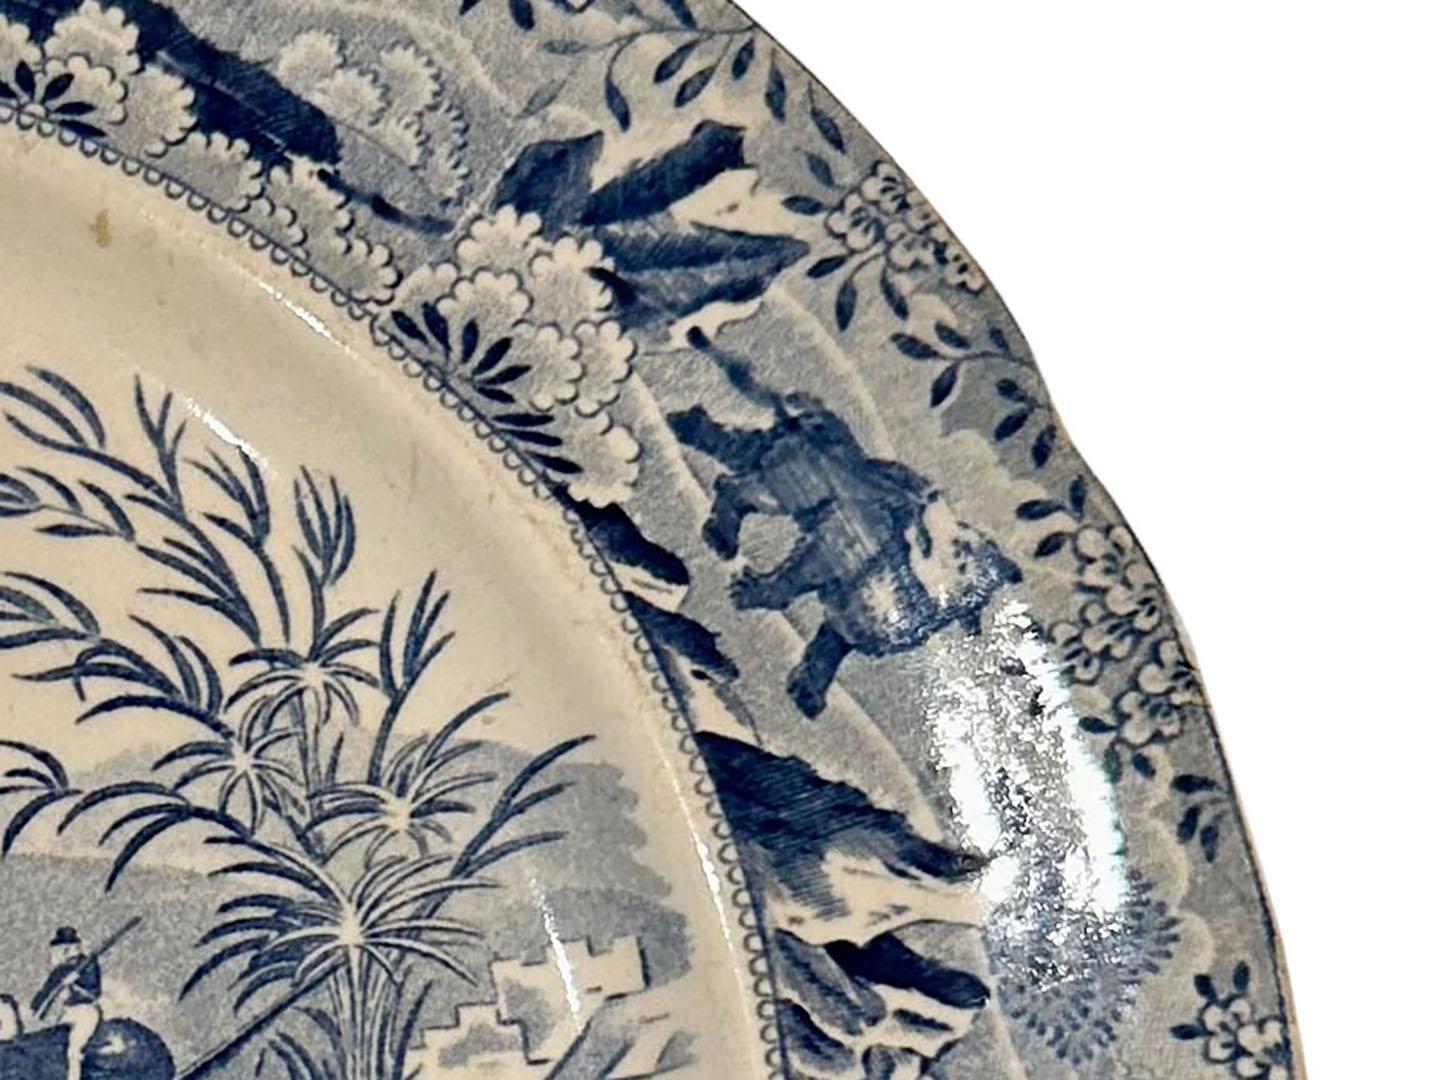 Early 19th Century Blue And White Transfer Ware Spode Dinner Plate For Sale